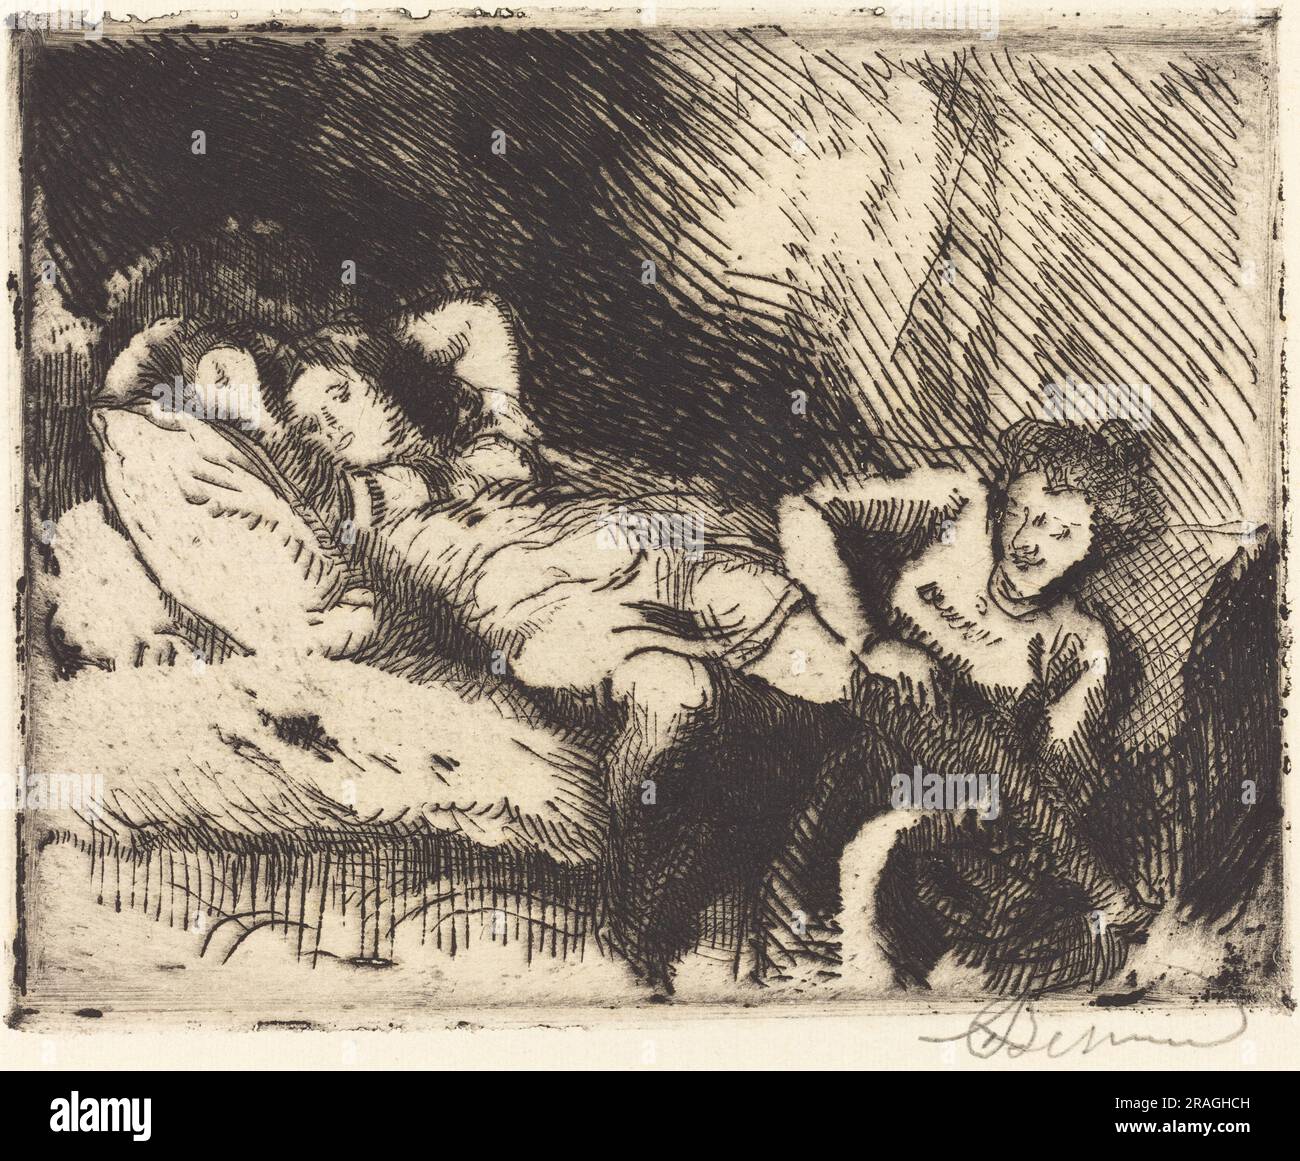 'Albert Besnard, Going to Bed (Le coucher), 1913, etching in black on laid paper, plate: 11 x 13.8 cm (4 5/16 x 5 7/16 in.) sheet: 14.6 x 17.7 cm (5 3/4 x 6 15/16 in.), Gift of Mr. and Mrs. Daniel Bell, in Honor of the 50th Anniversary of the National Gallery of Art, 1990.95.30' Stock Photo